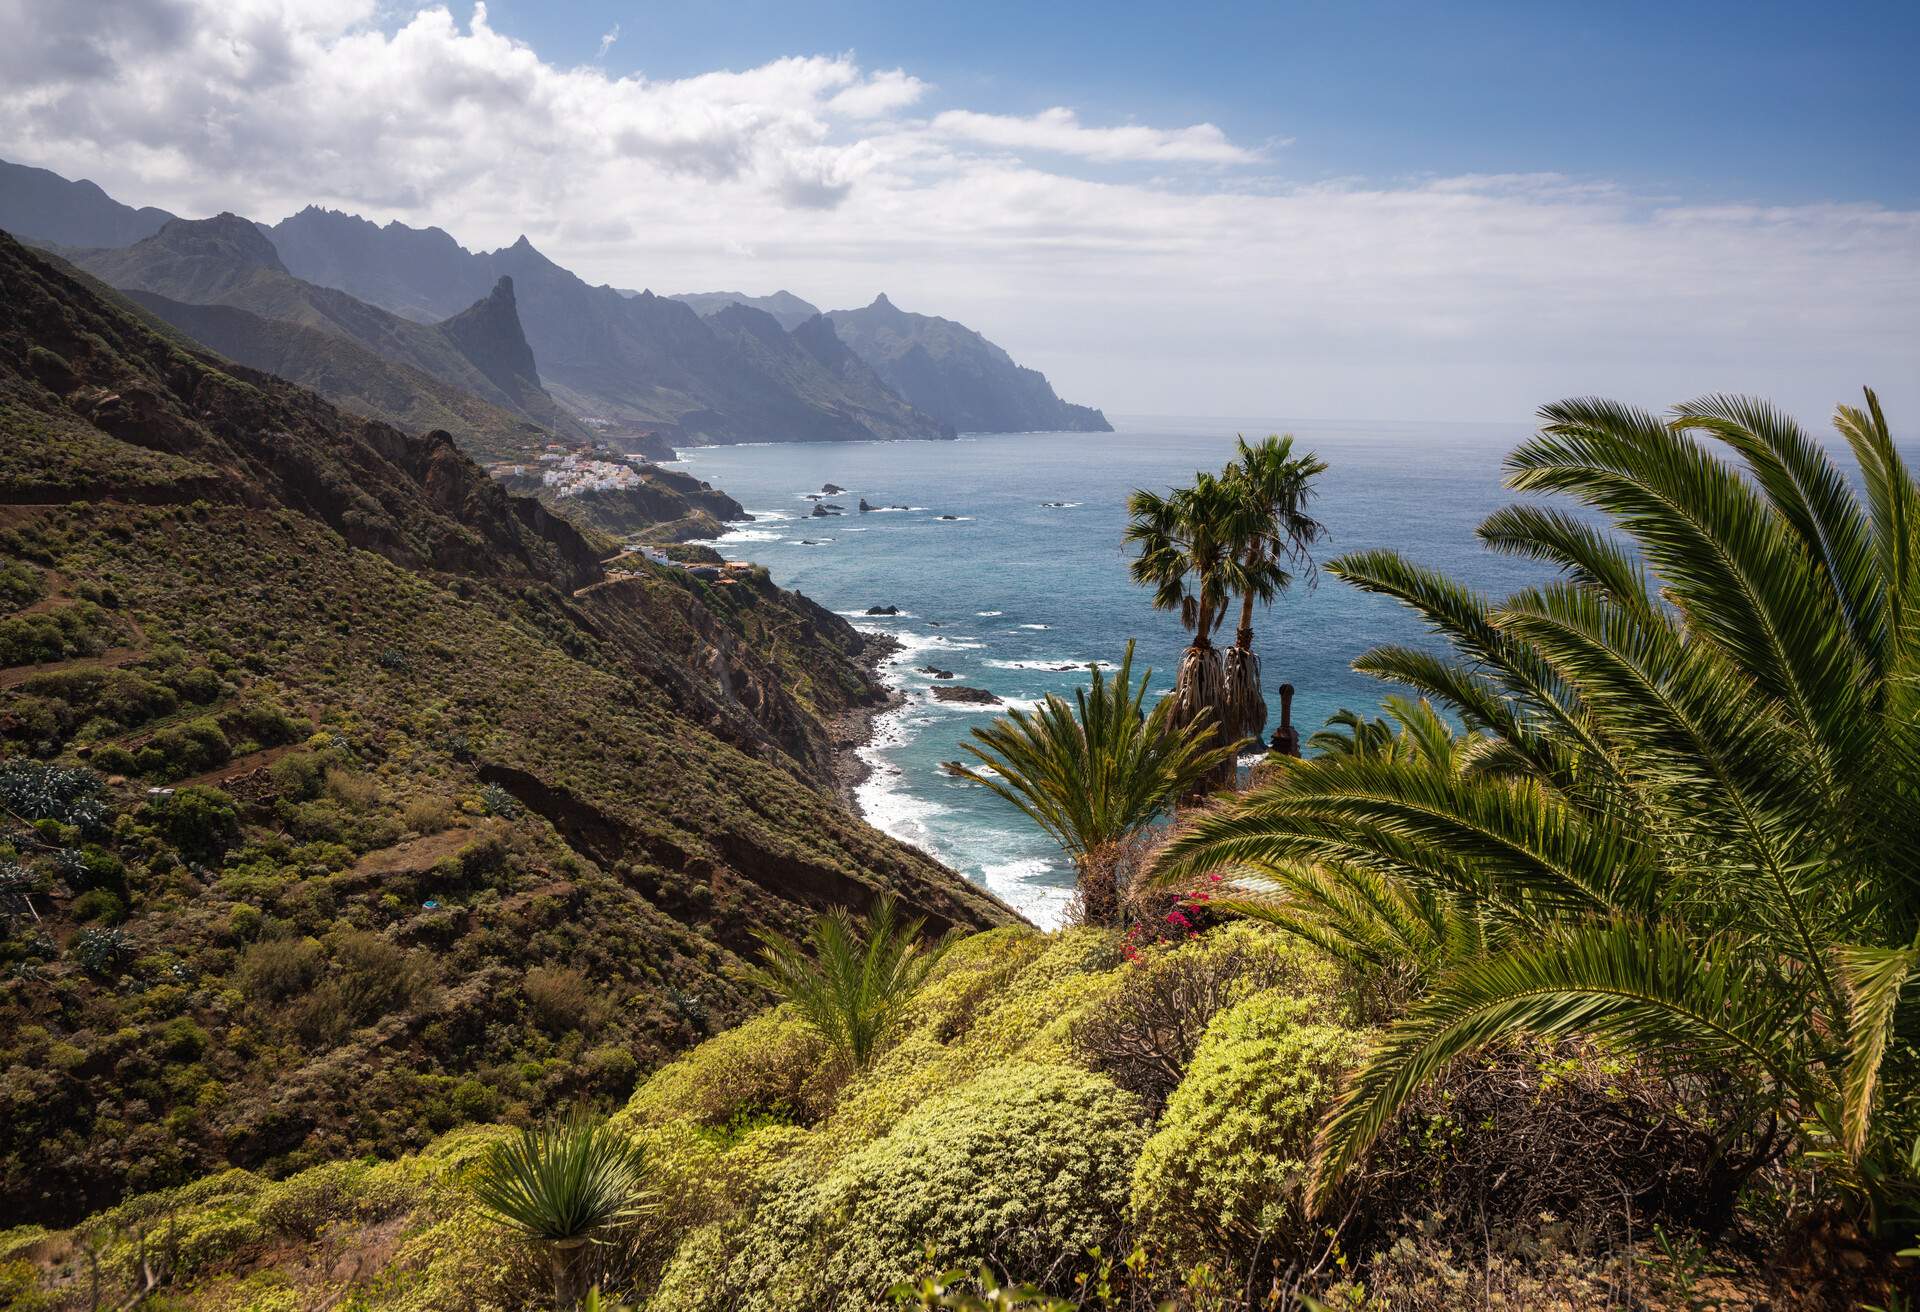 The northern coast at Benijo with its mountains and rocks in the northern part of Tenerife, Spain.